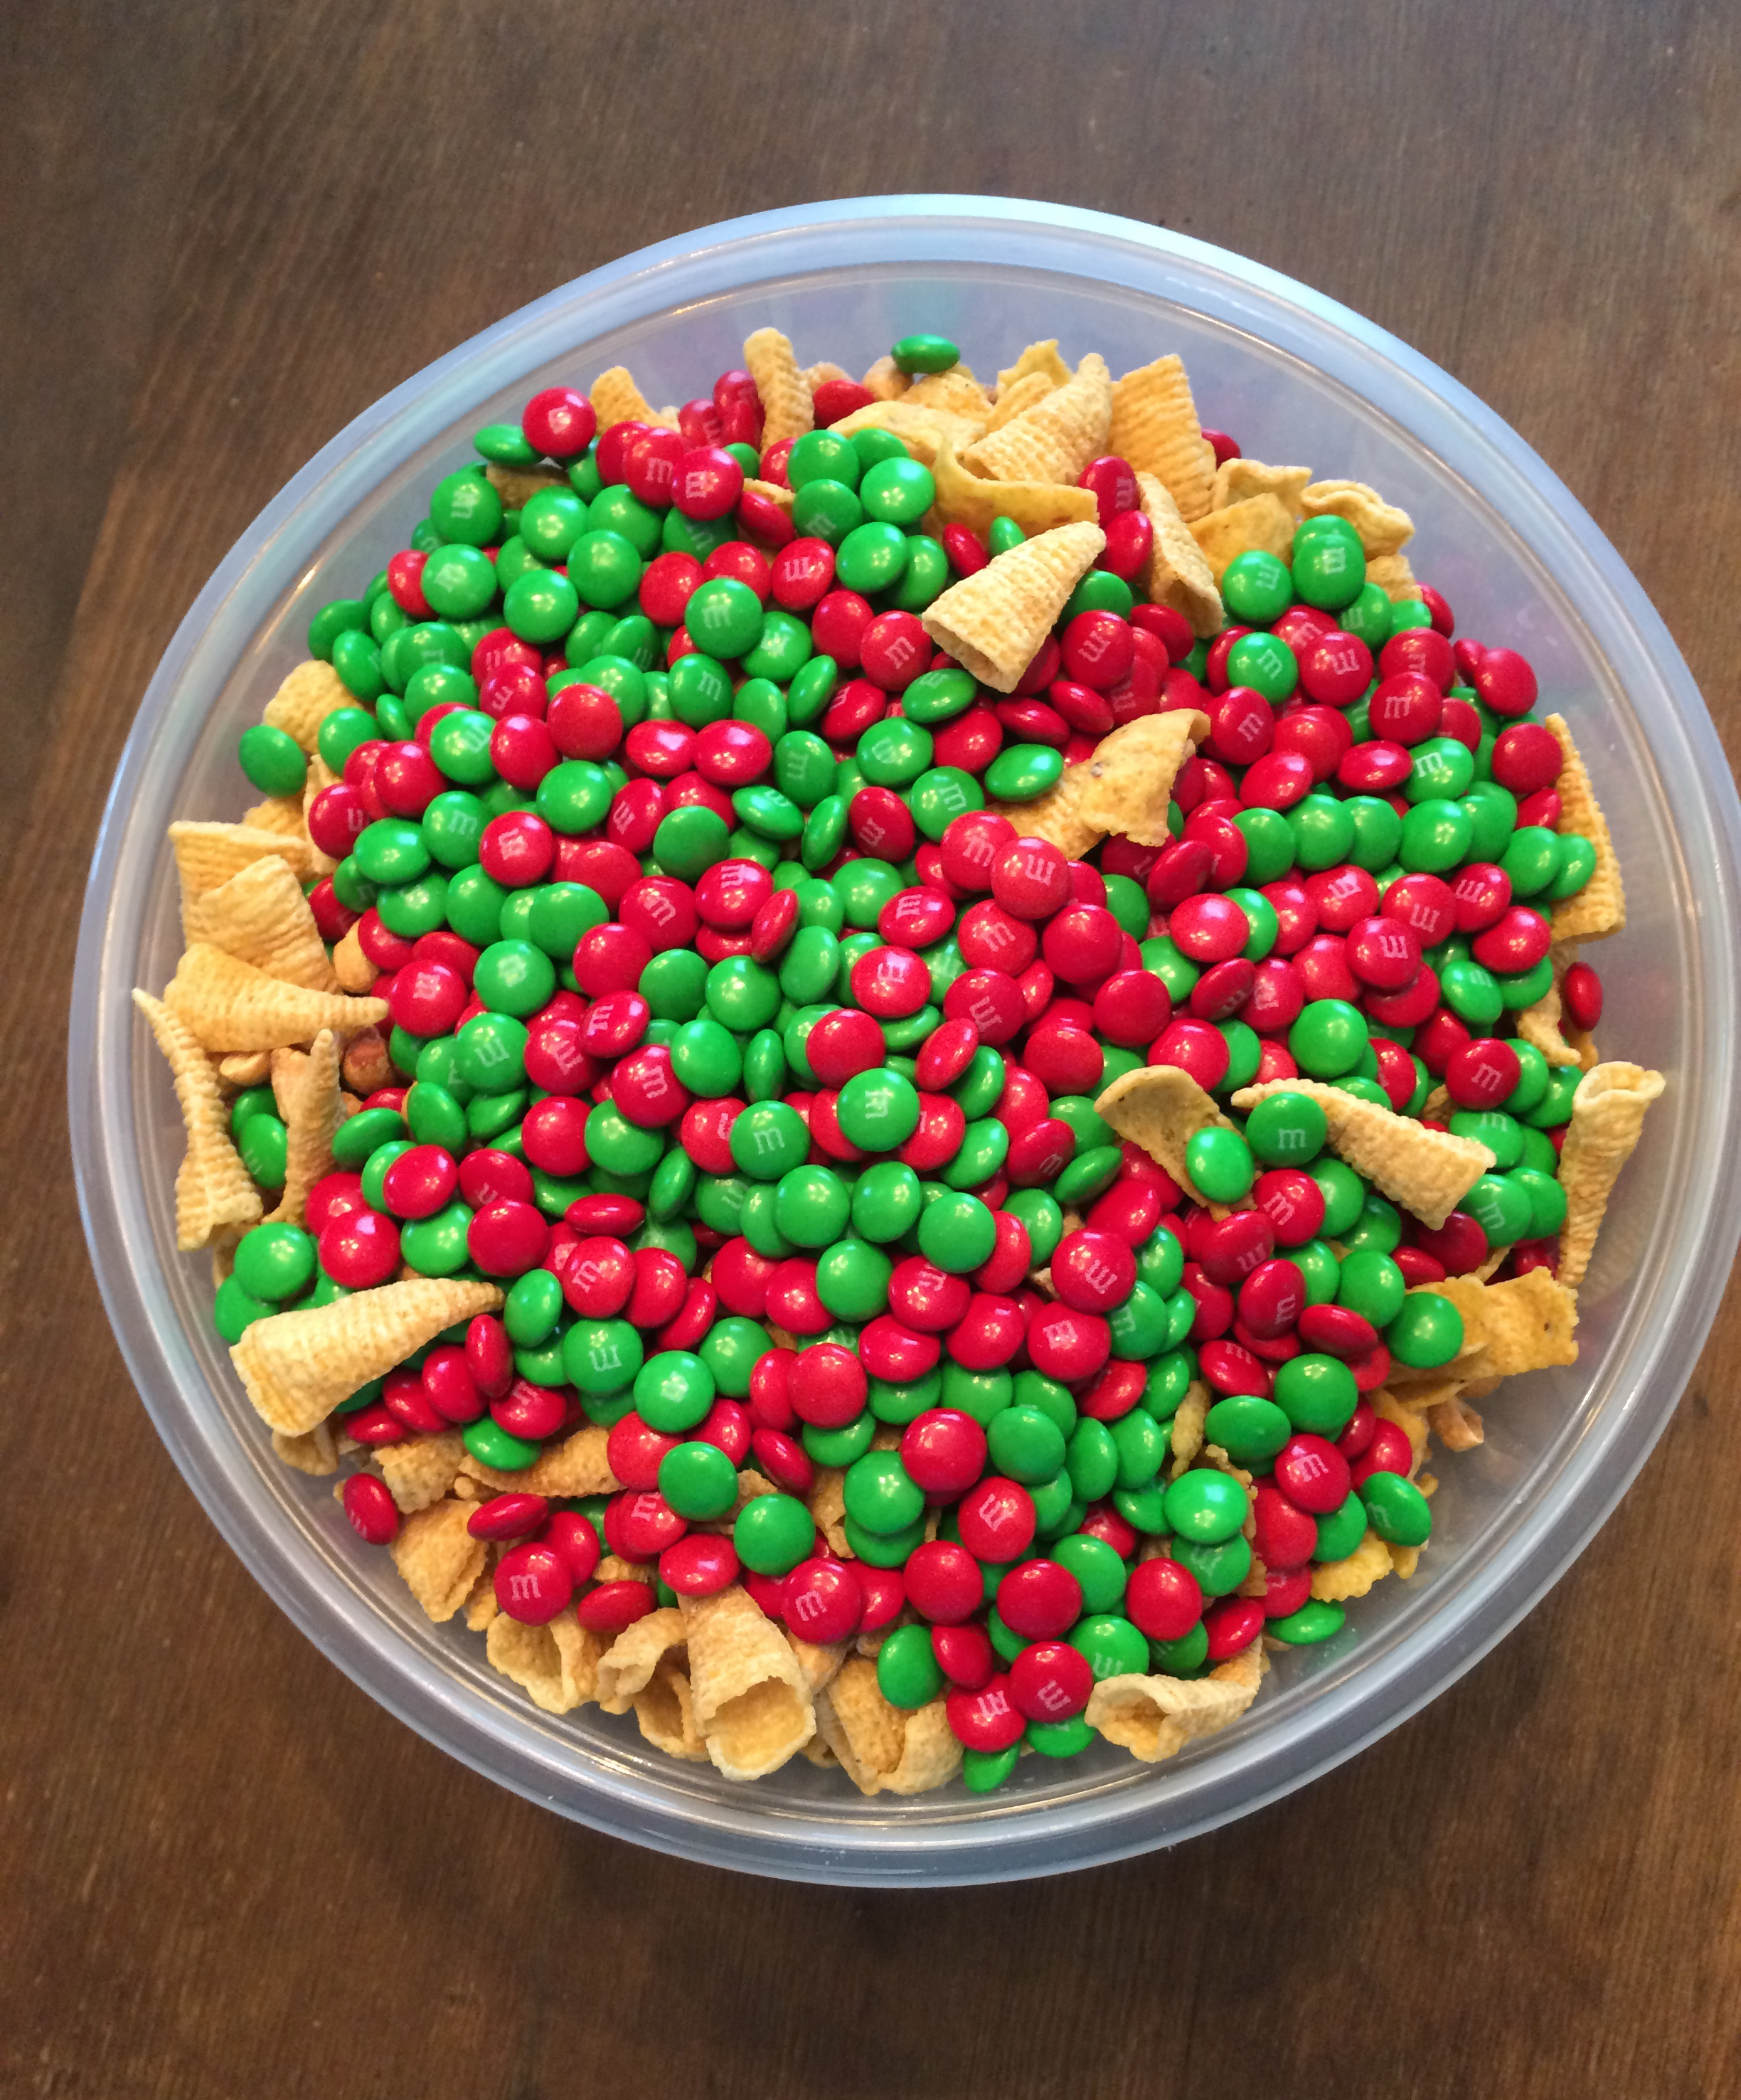 After I poured in the M&M's, the Christmas Reindeer Crack looked very festive.